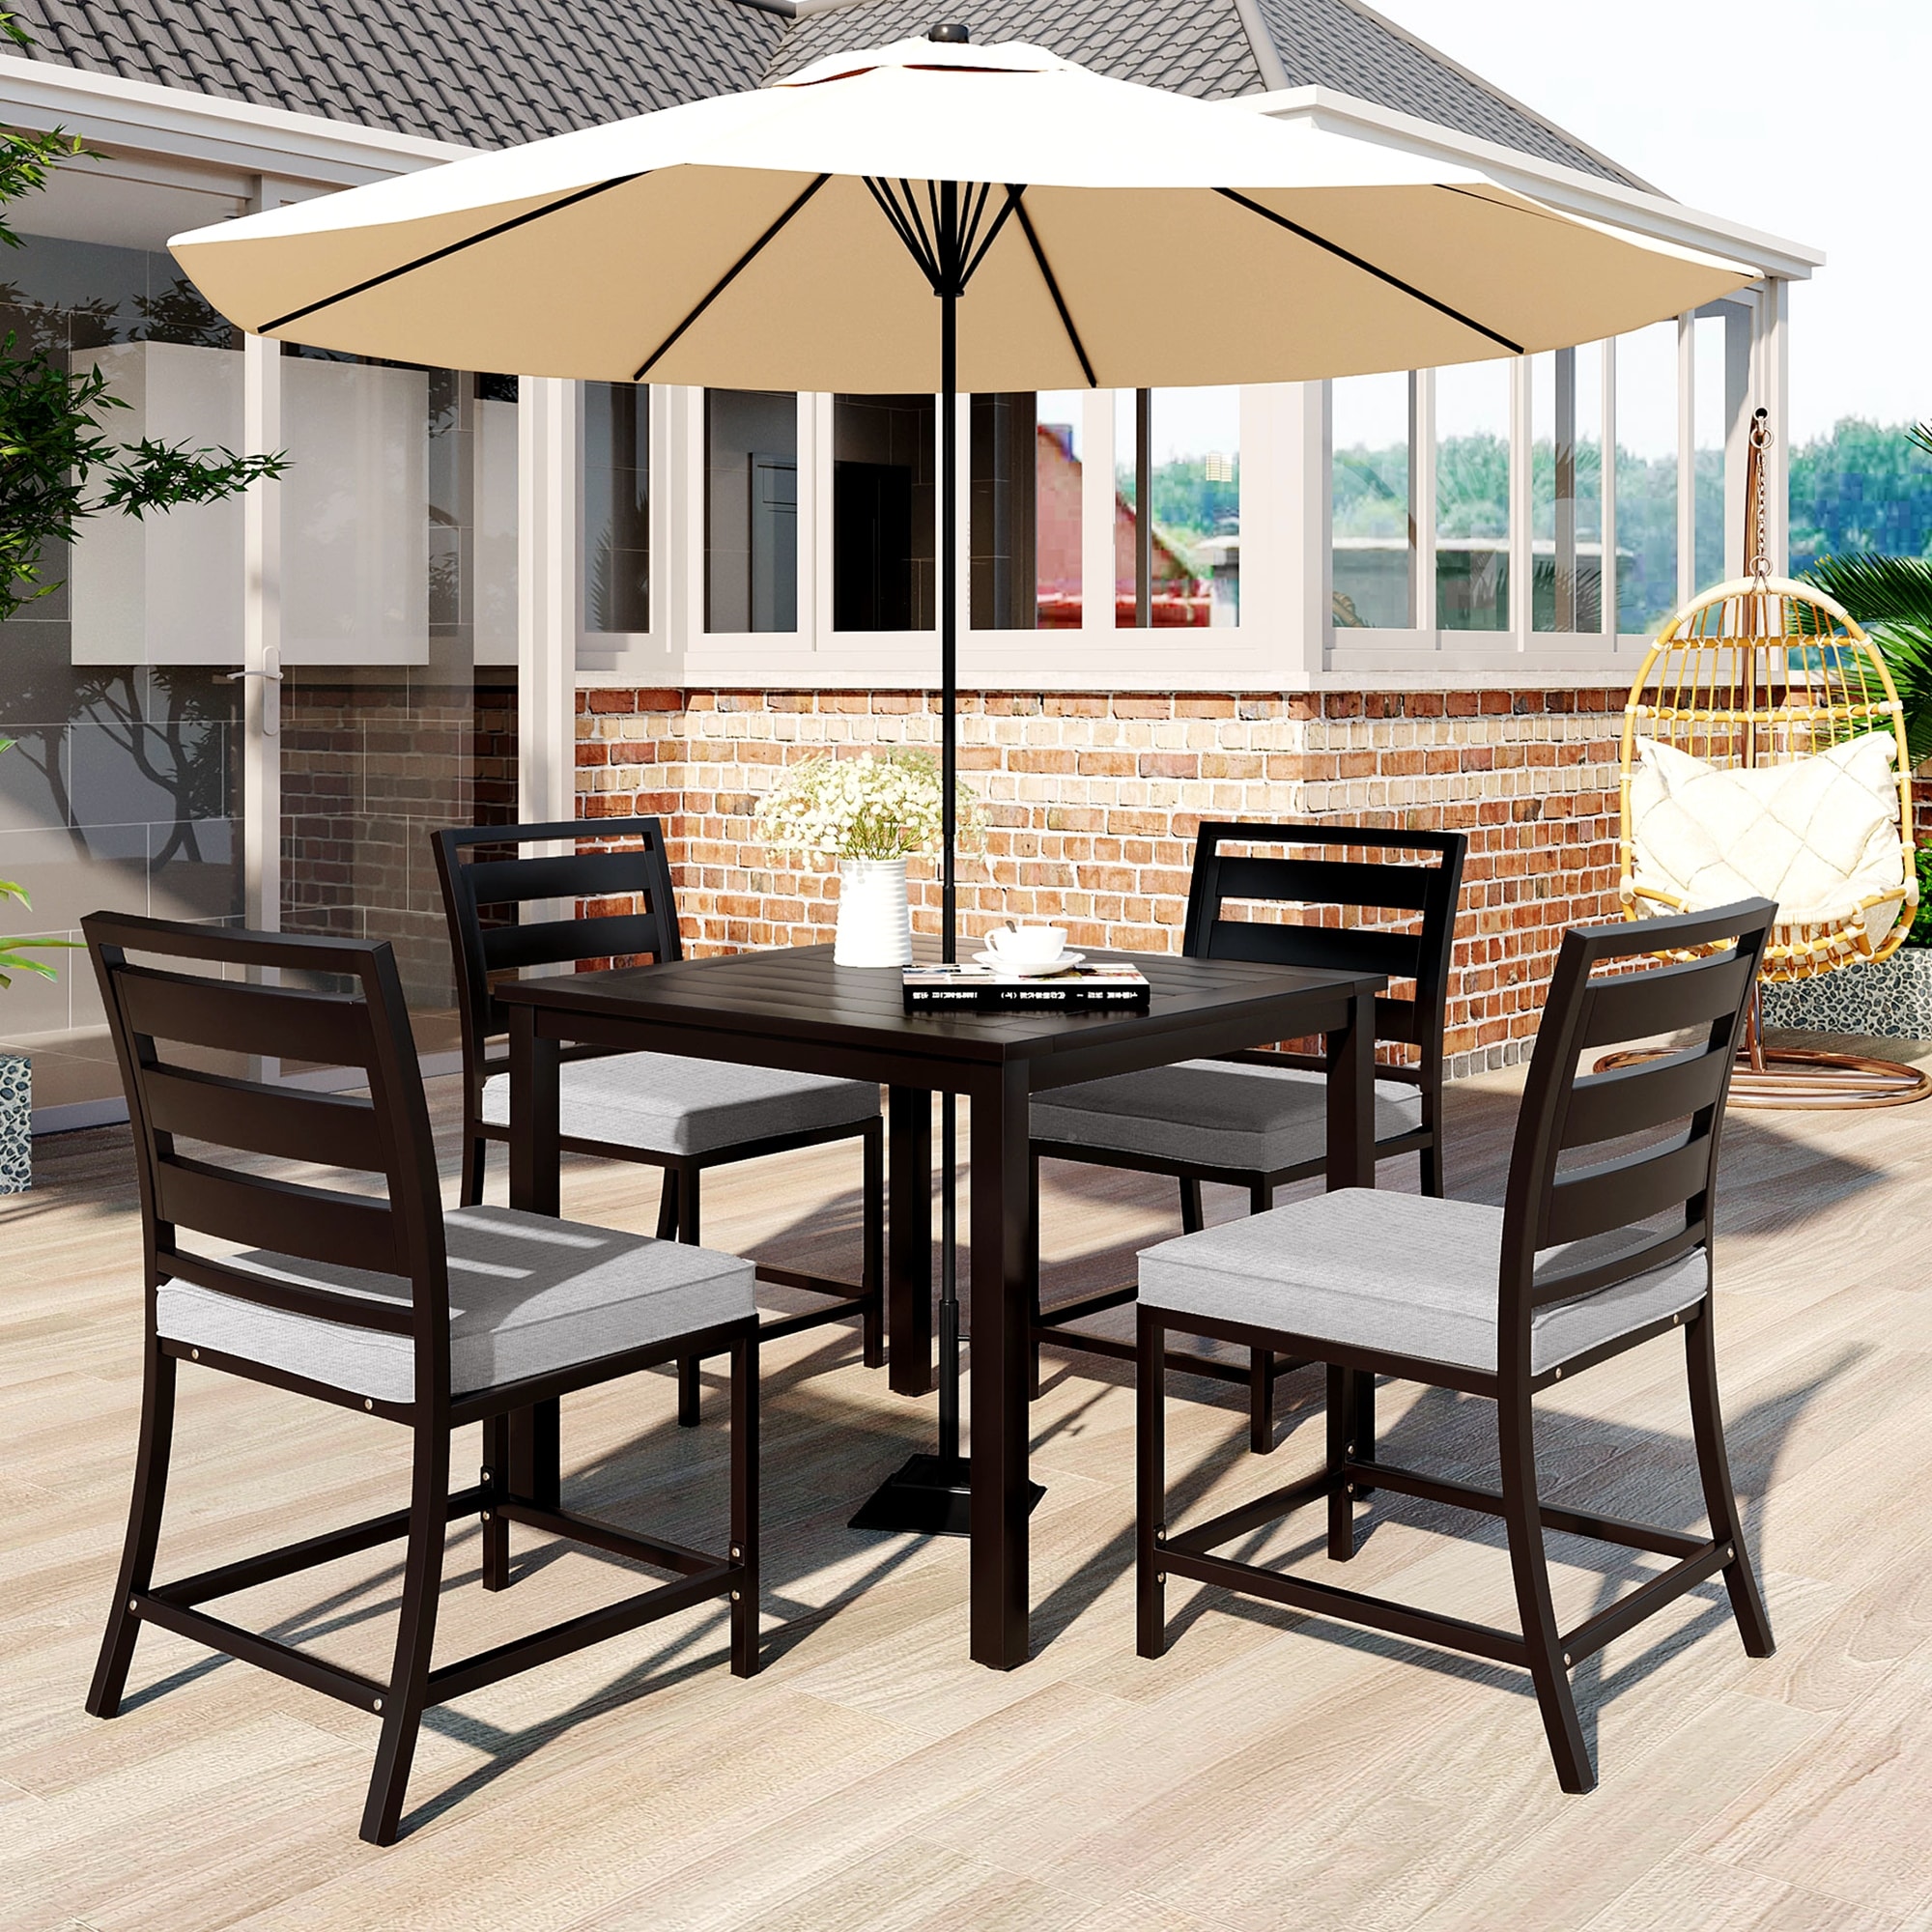 Outdoor Four-person Dining Table And Chairs Are Suitable For Courtyards  Balconies  Lawns